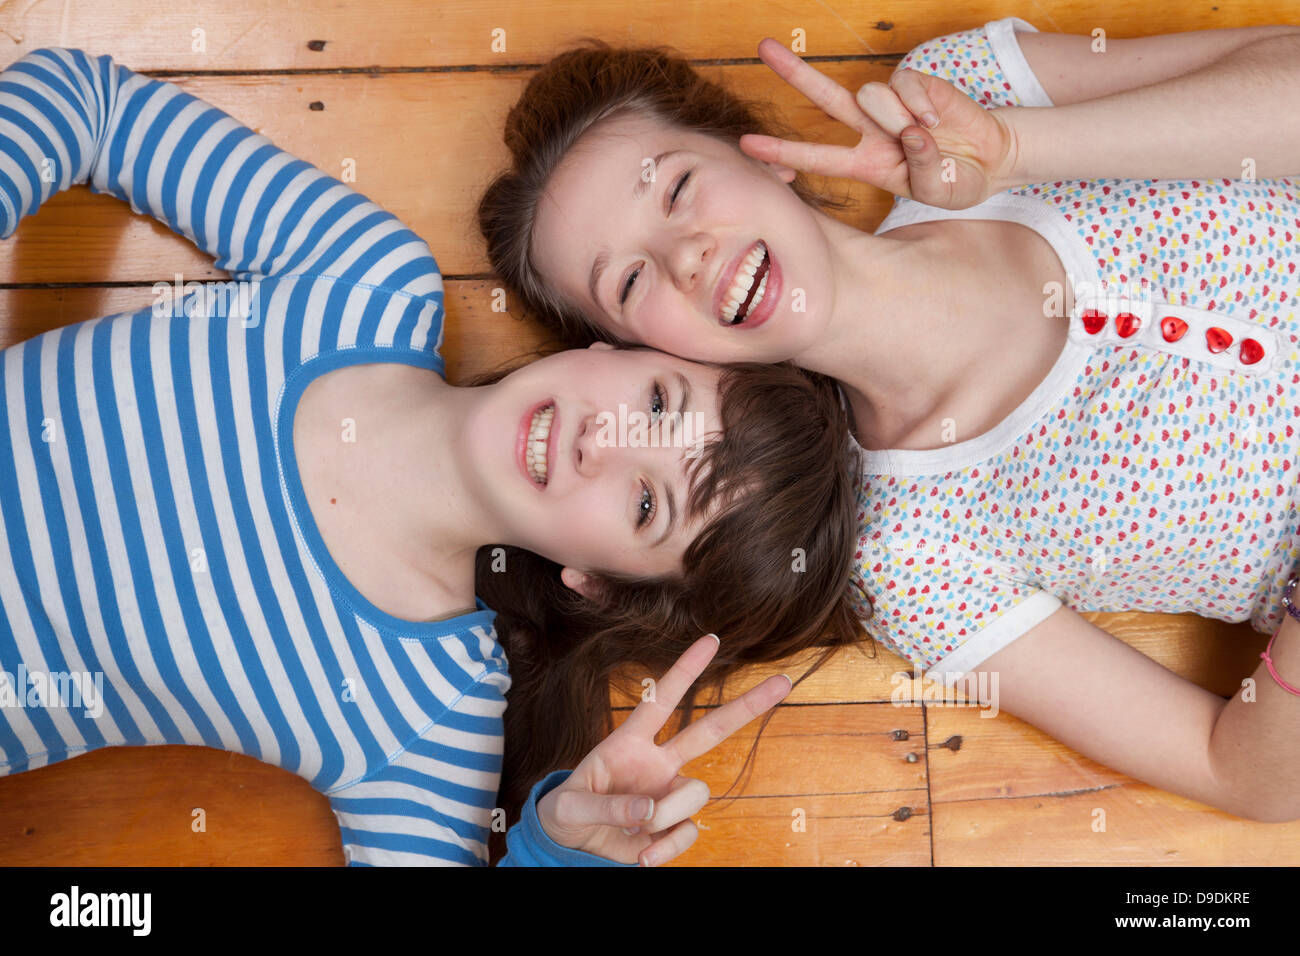 Girls lying on wooden floor doing peace signs Stock Photo